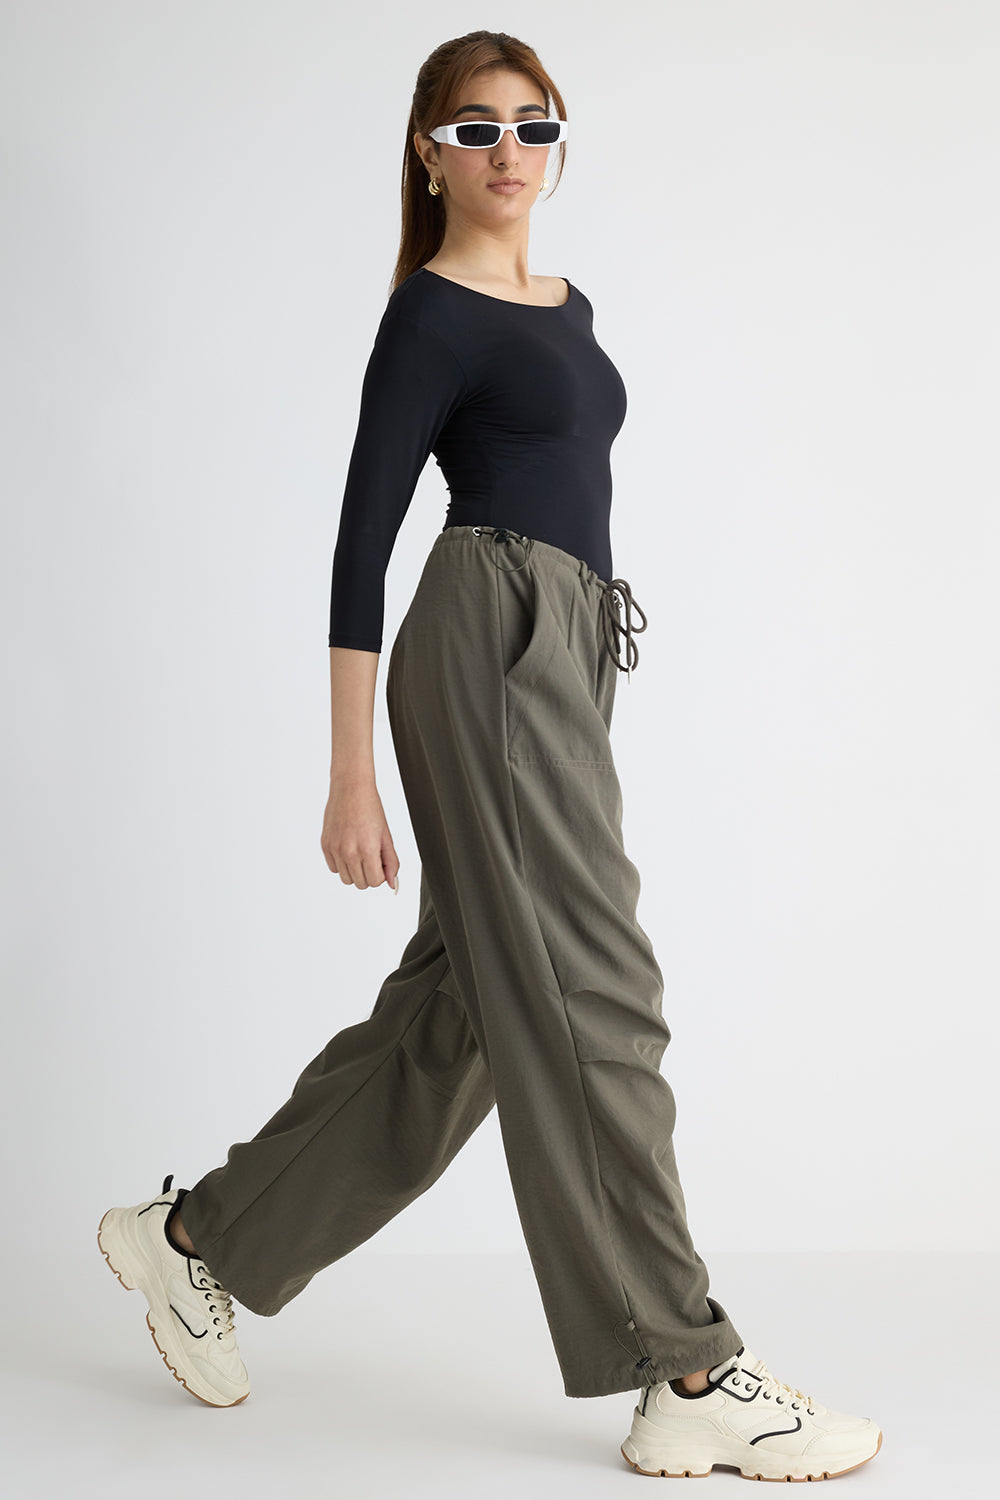 Test The Limit Distressed Pant - Olive